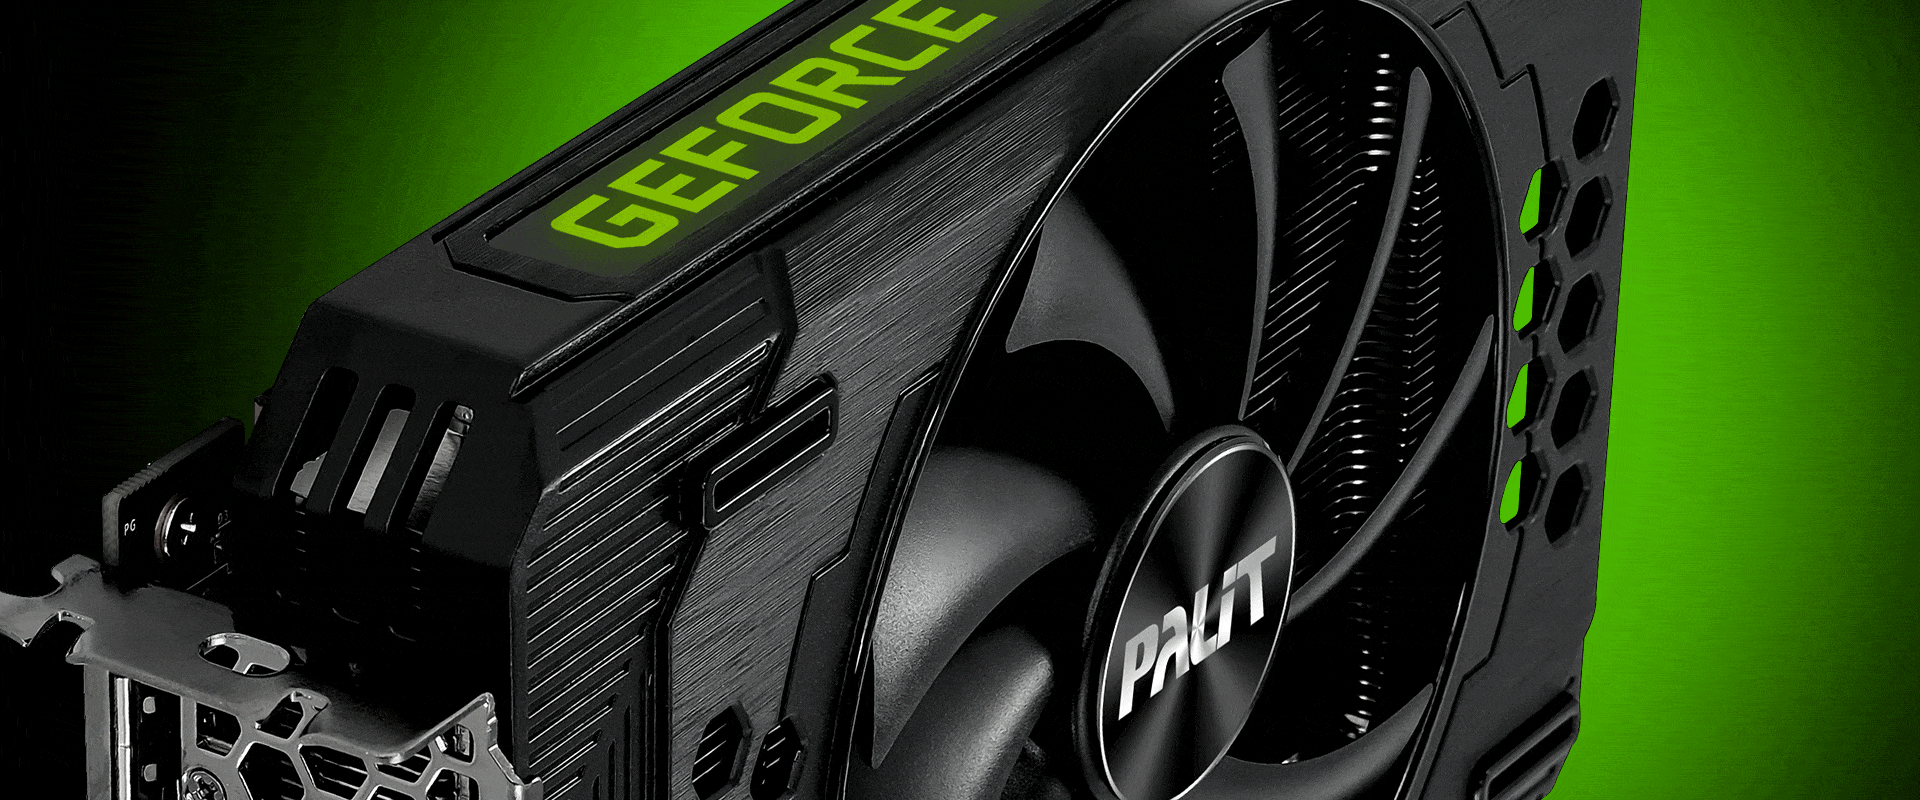 Palit NVIDIA GeForce RTX 3060 StormX 8GB Cover View